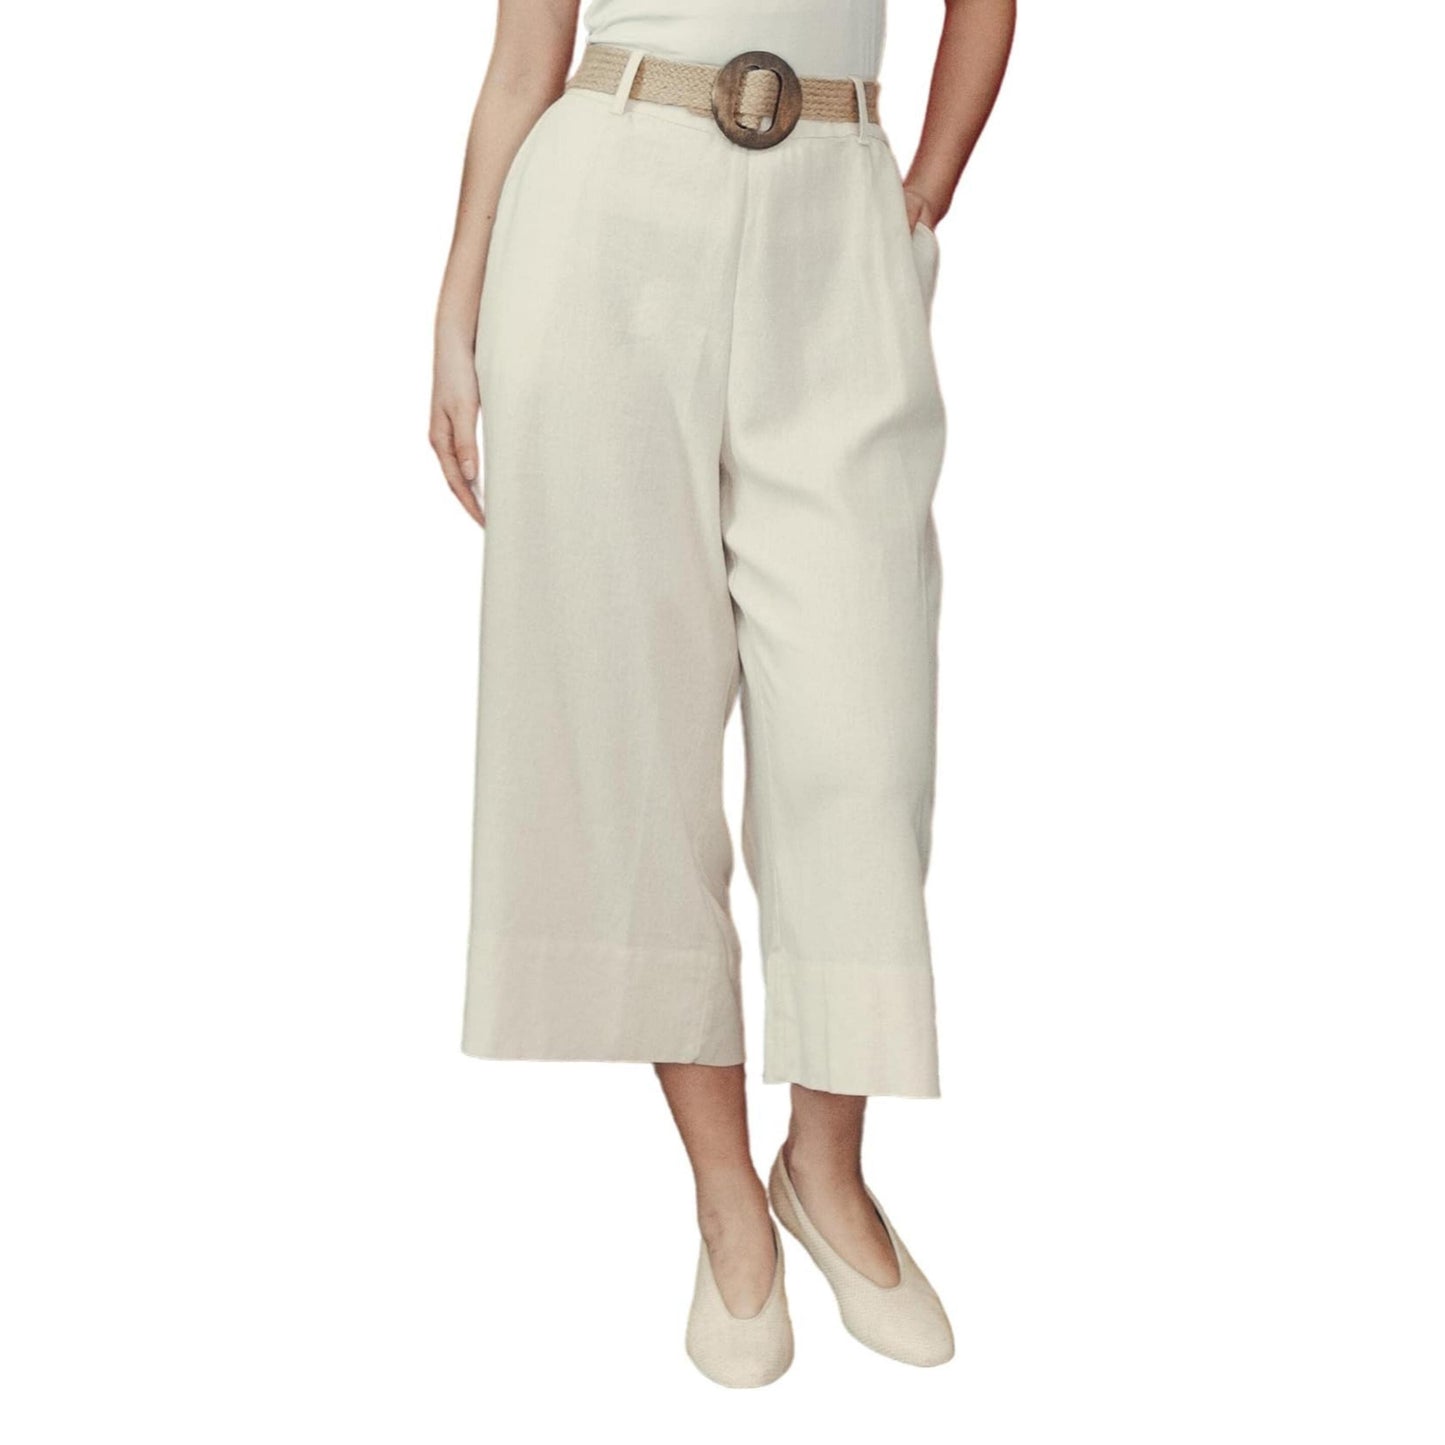 Cropped Pants For Women Office Women Capri Pants With Pockets Wide